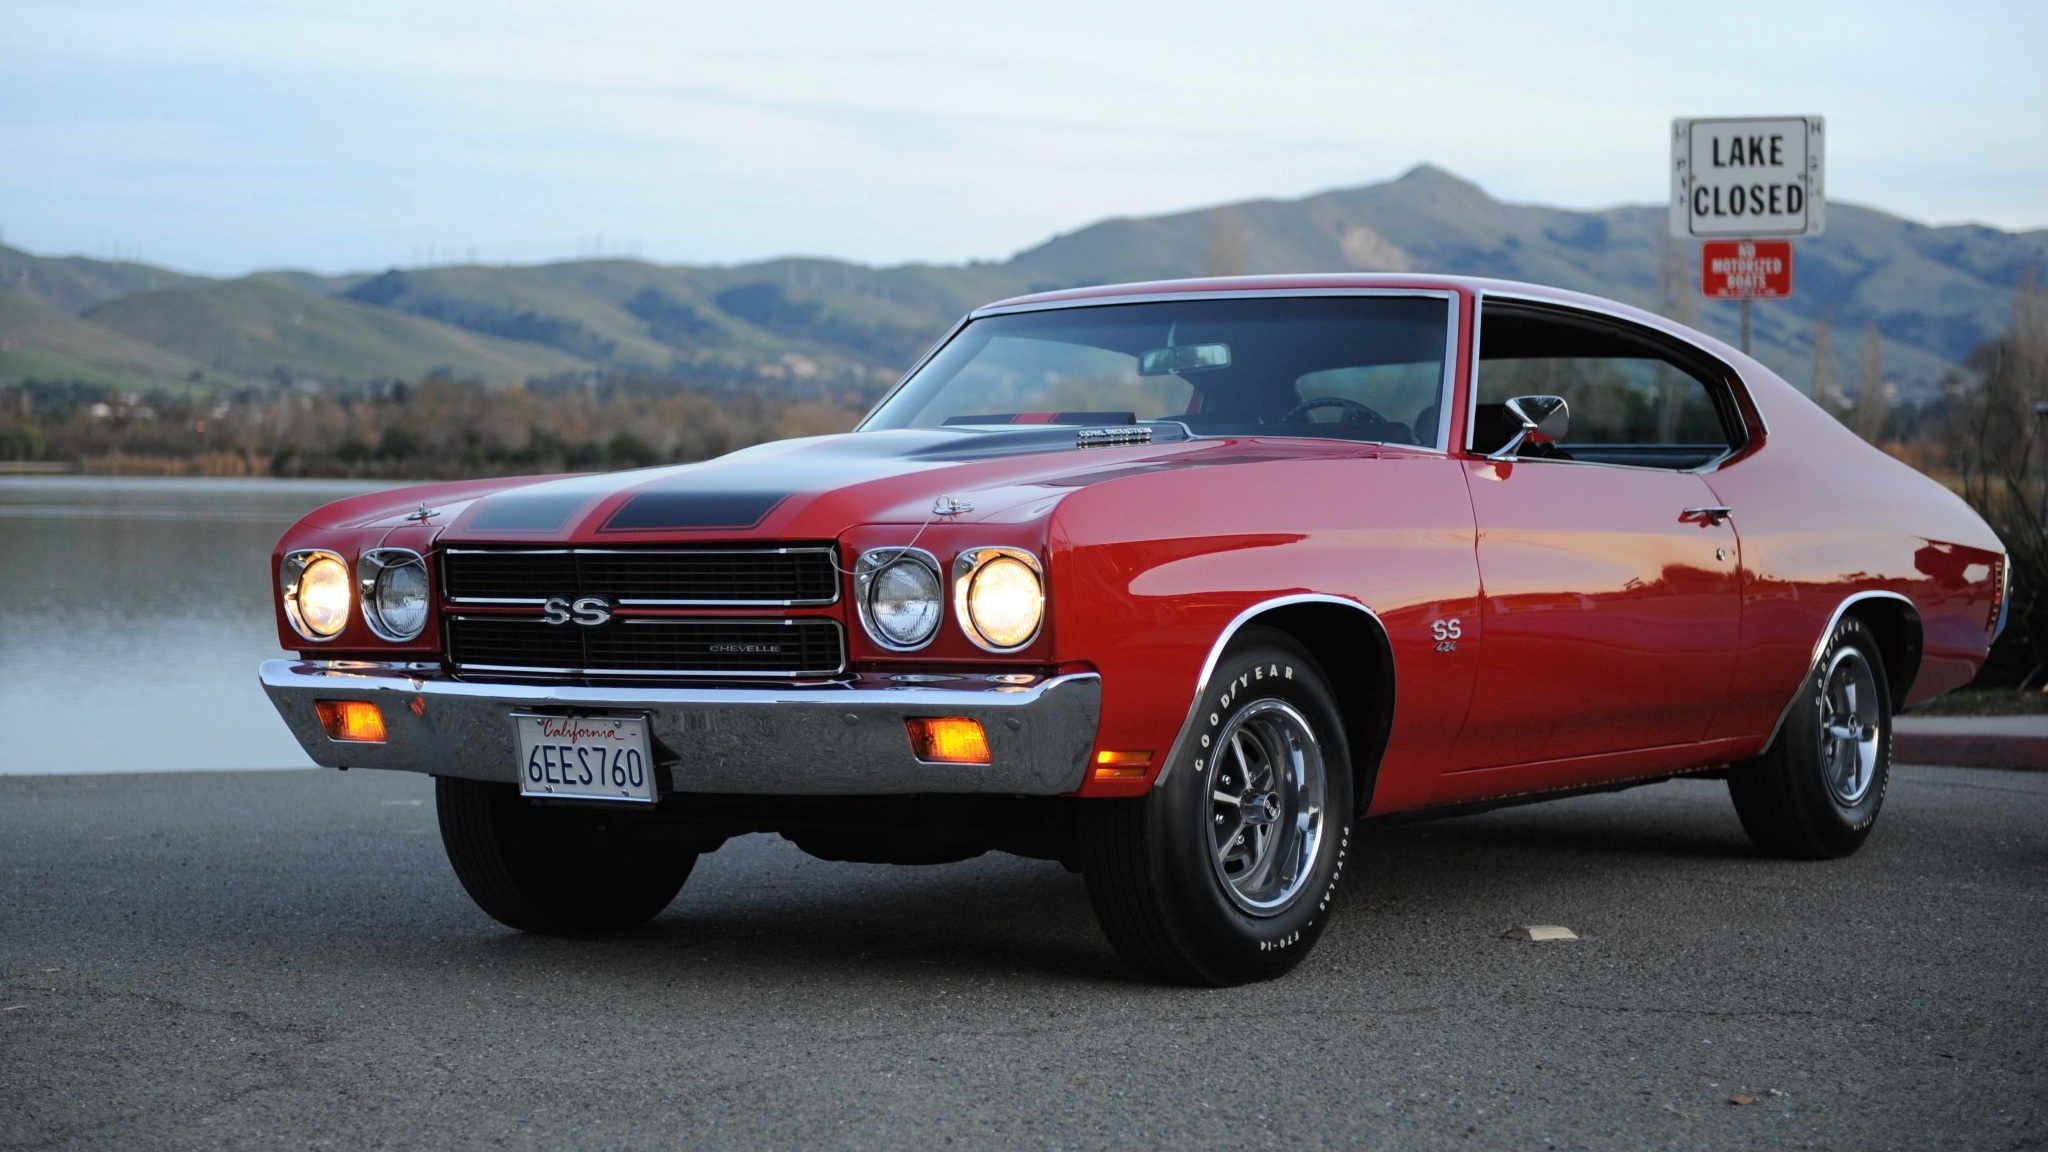 Download wallpaper 2048x1152 chevrolet chevelle ss red 454 2048x1152